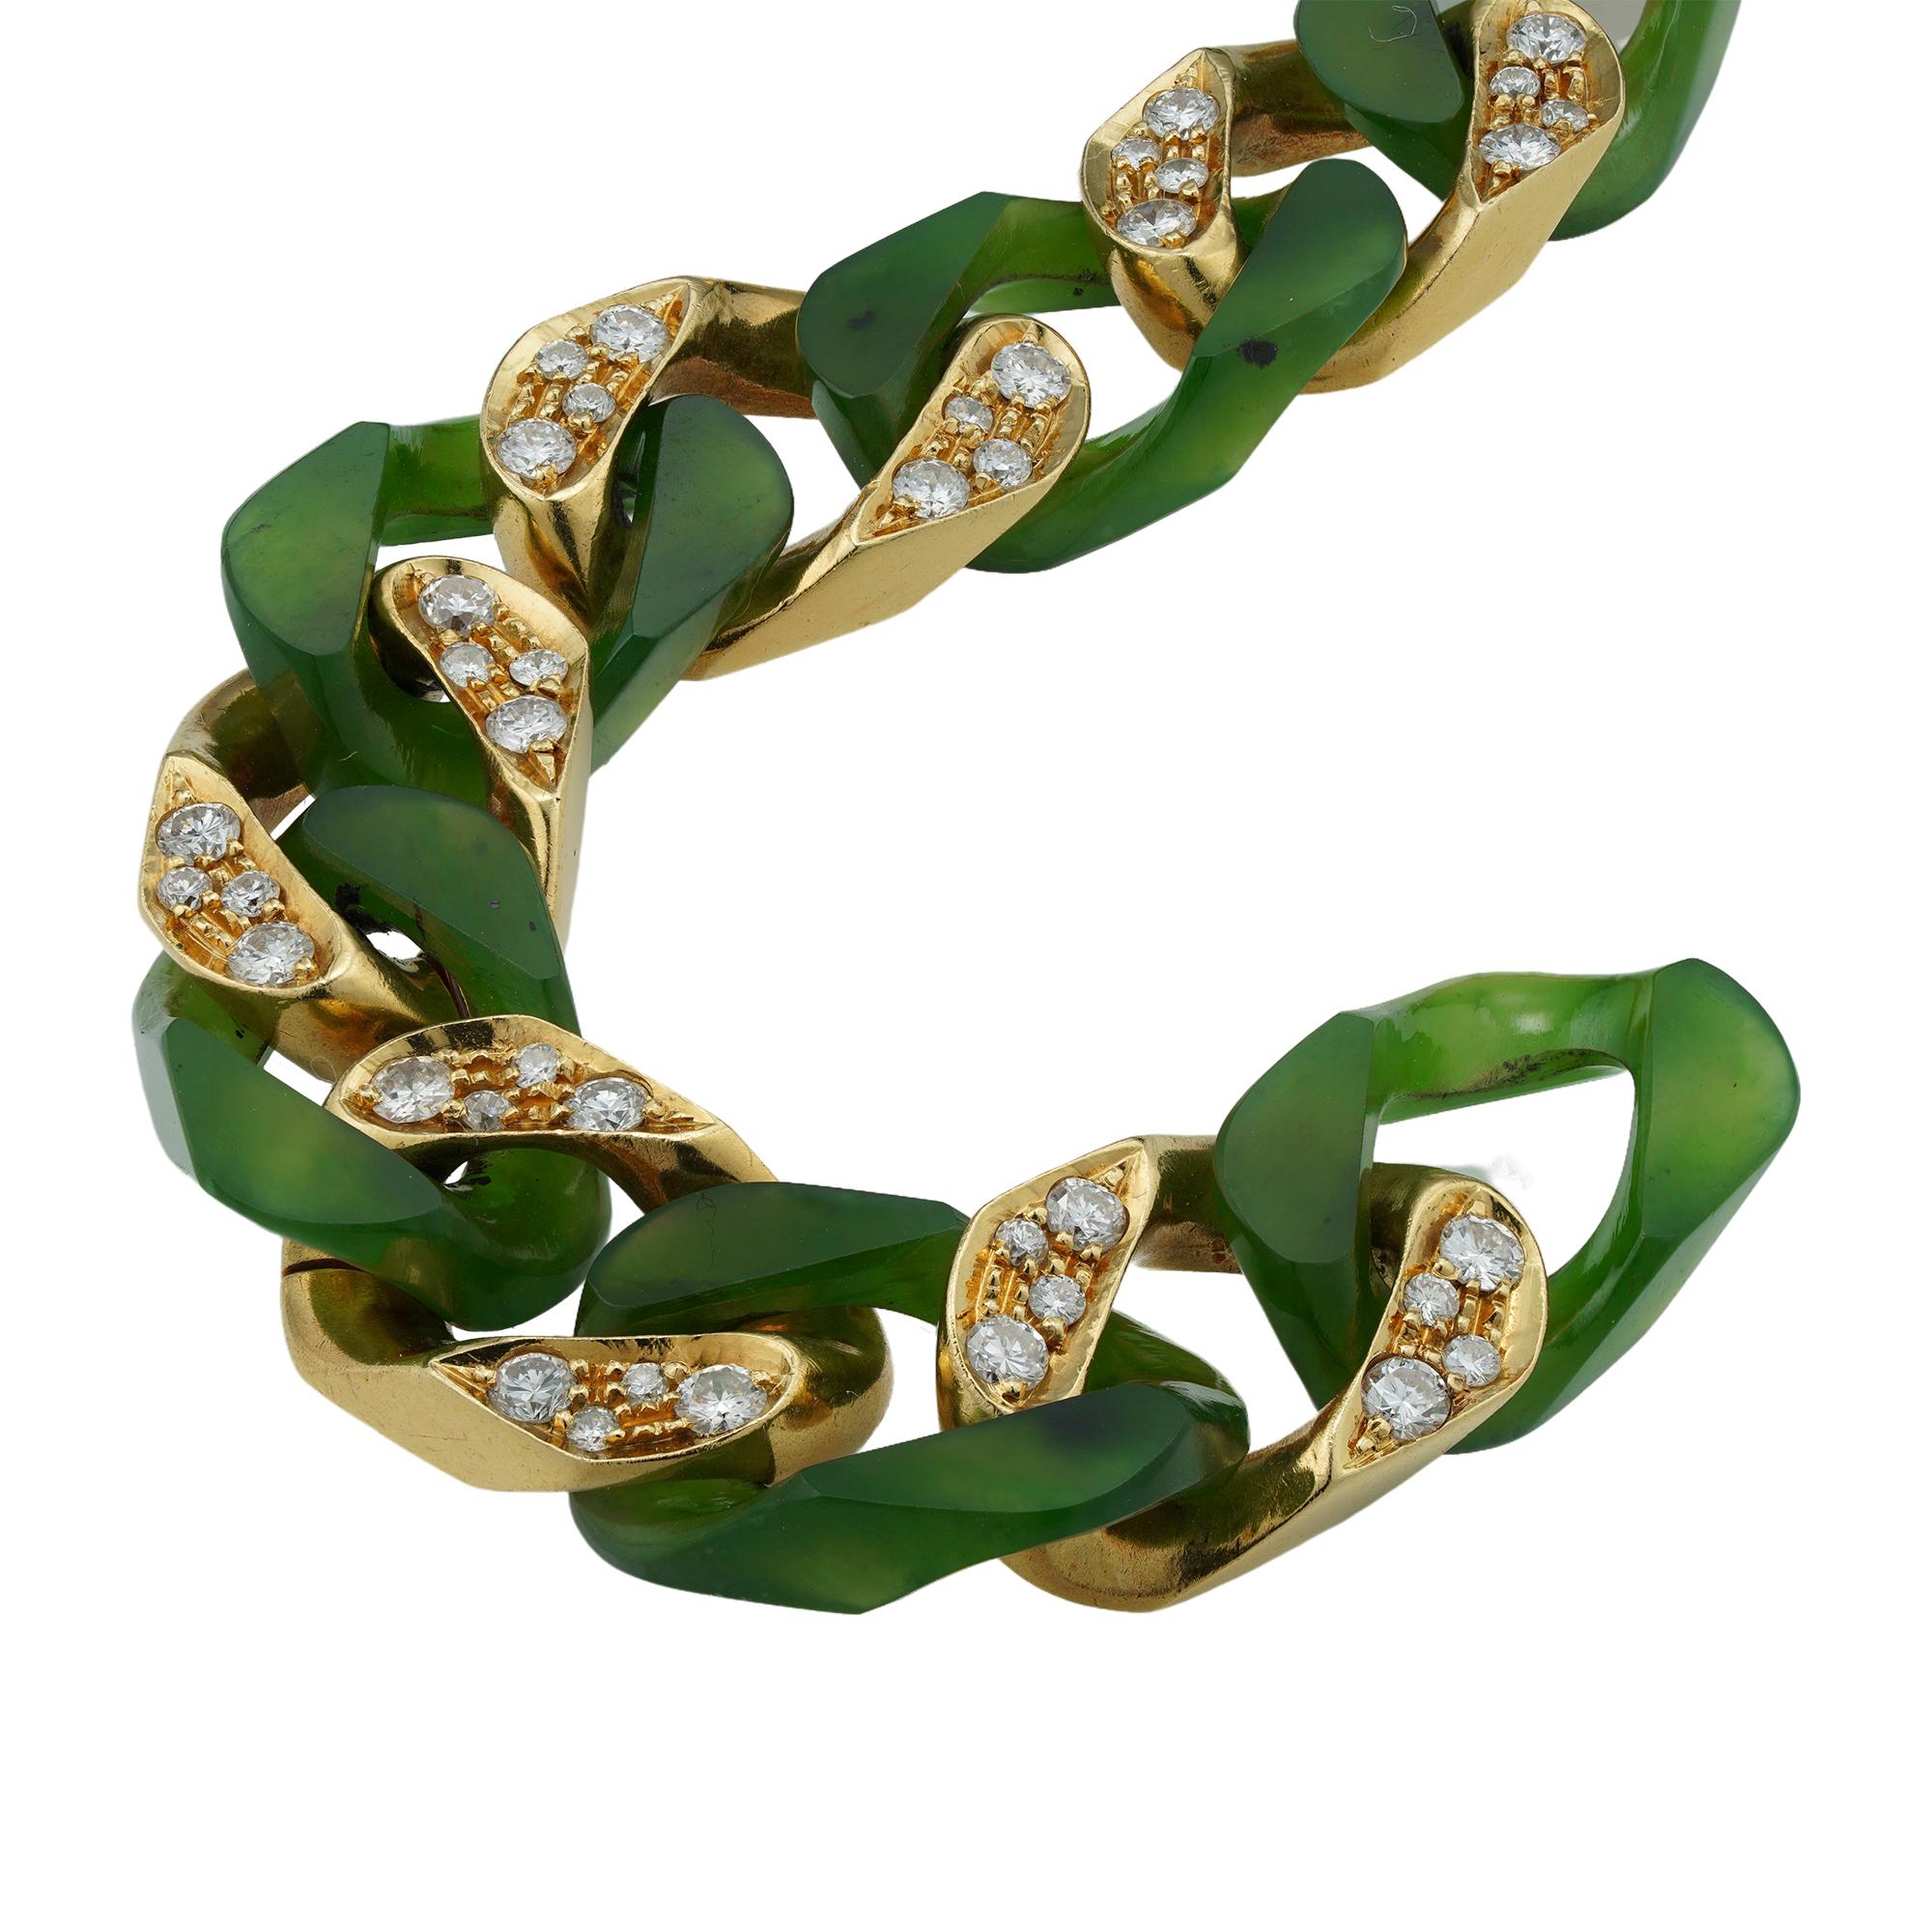 A vintage Carimati nephrite, diamond and gold bracelet, consisting of nine carved nephrite links connected with nine yellow gold diamond-set links, the round brilliant-cut diamonds estimated to weigh 2.7 carats in total, all grain-set in yellow